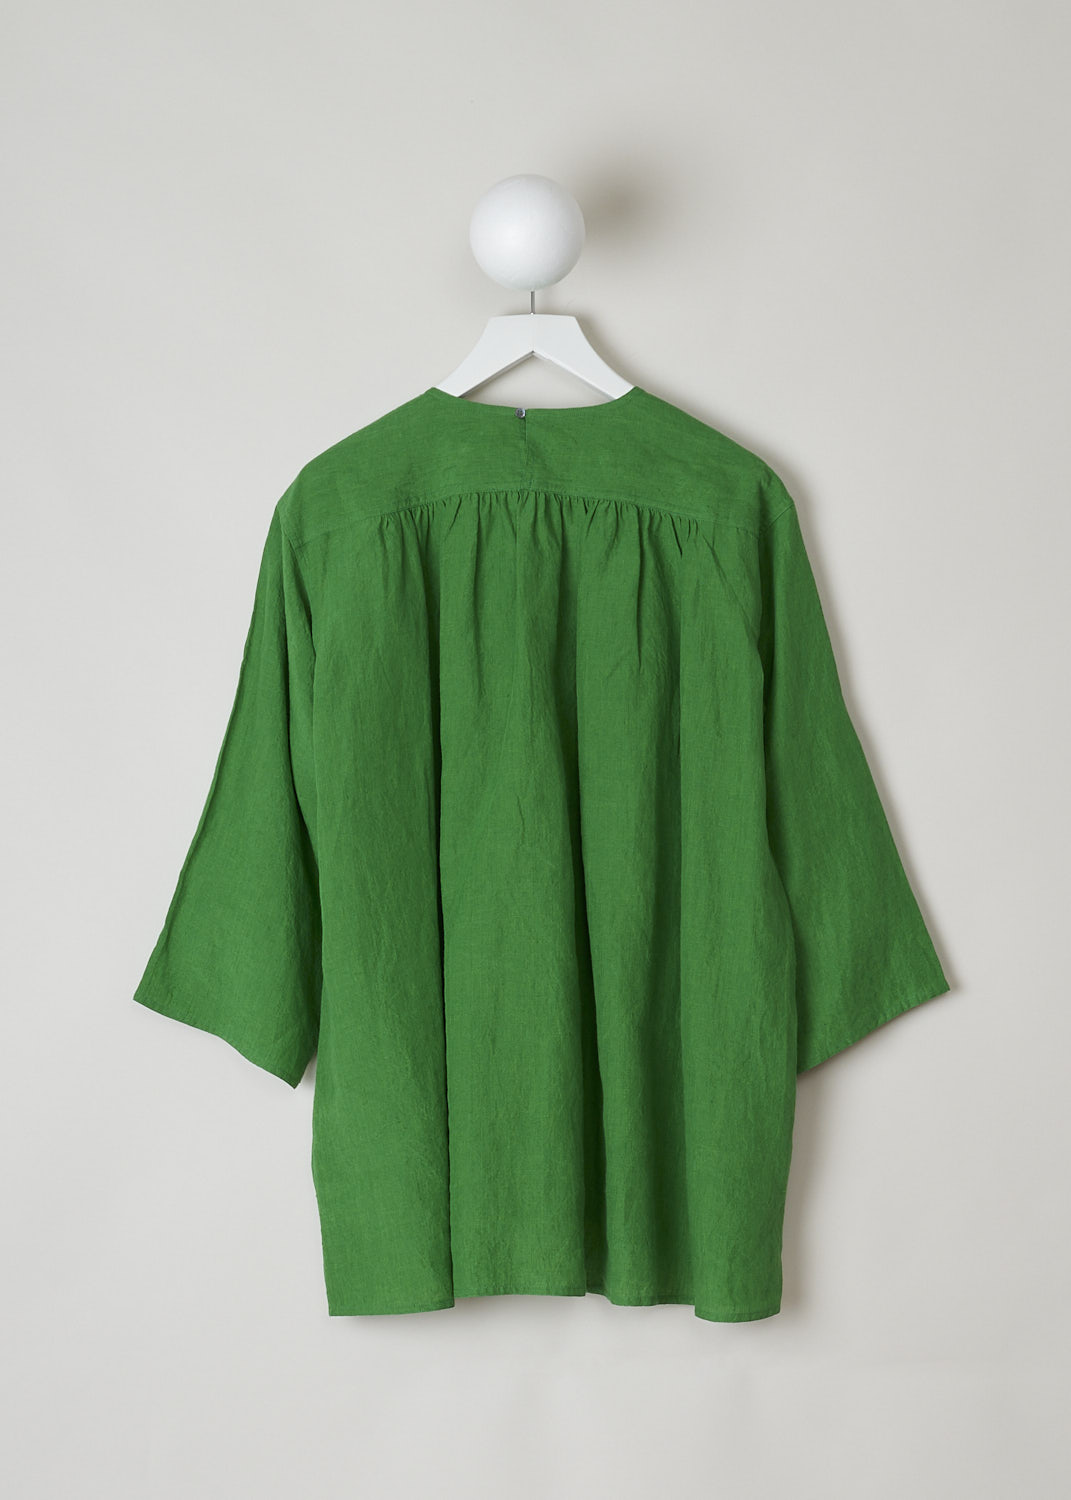 SOFIE Dâ€™HOORE, BRIGHT GREEN BINETTE TOP, BINETTE_LIFE_GRASS, Green, Back, This oversized bright green top features a round neckline, dropped shoulders and long sleeves. The A-line top has a square bib-like front with pleated details below. Concealed in the side seams, slanted pockets can be found. The top has an asymmetrical finish, meaning the back is a little longer than the front. 

